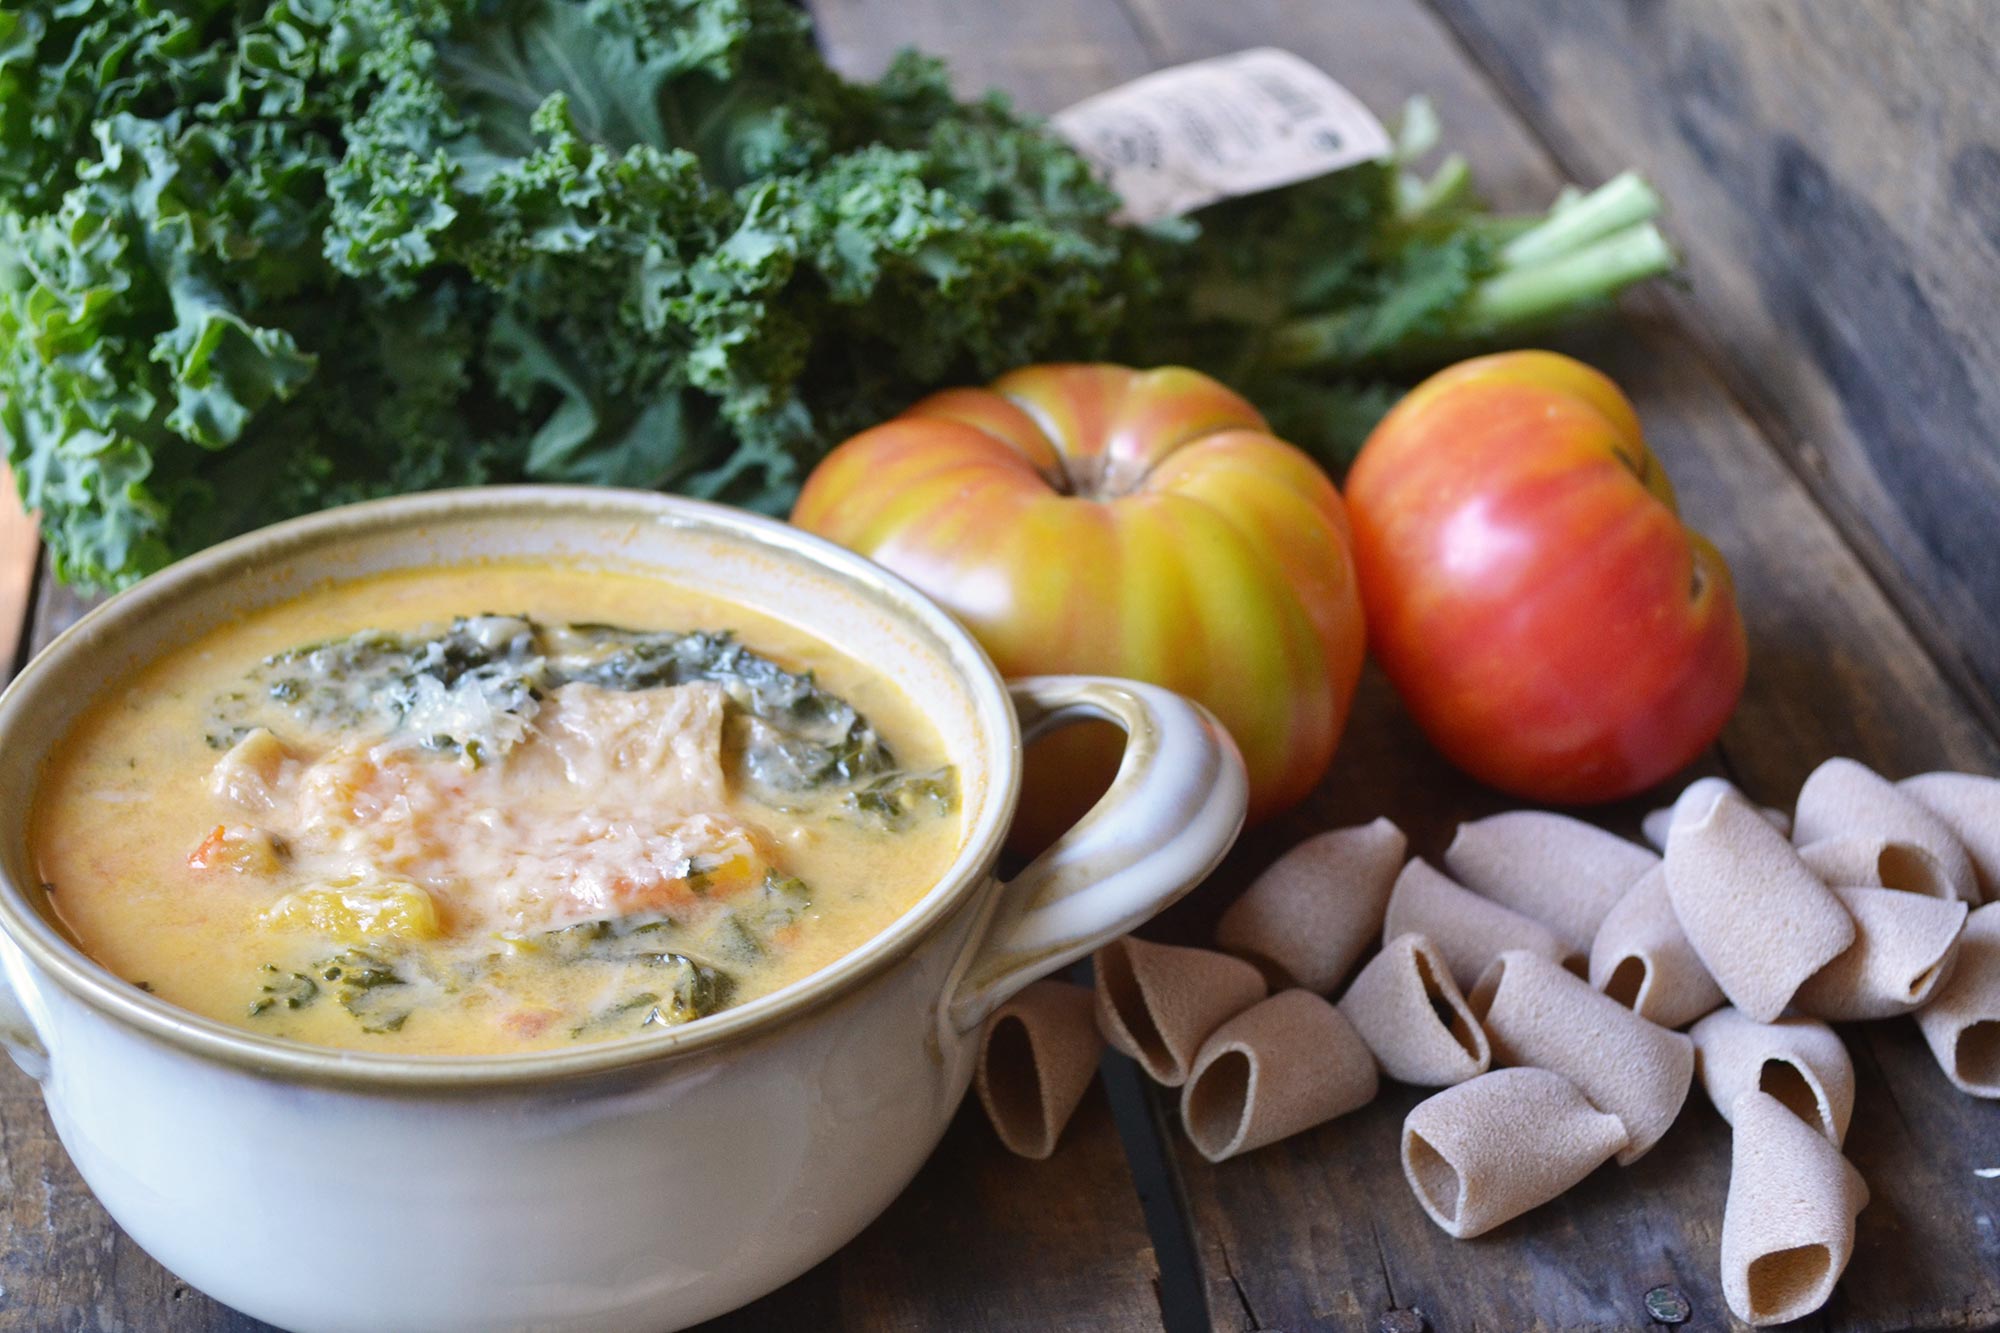 Rustic Kale and Tomato Soup